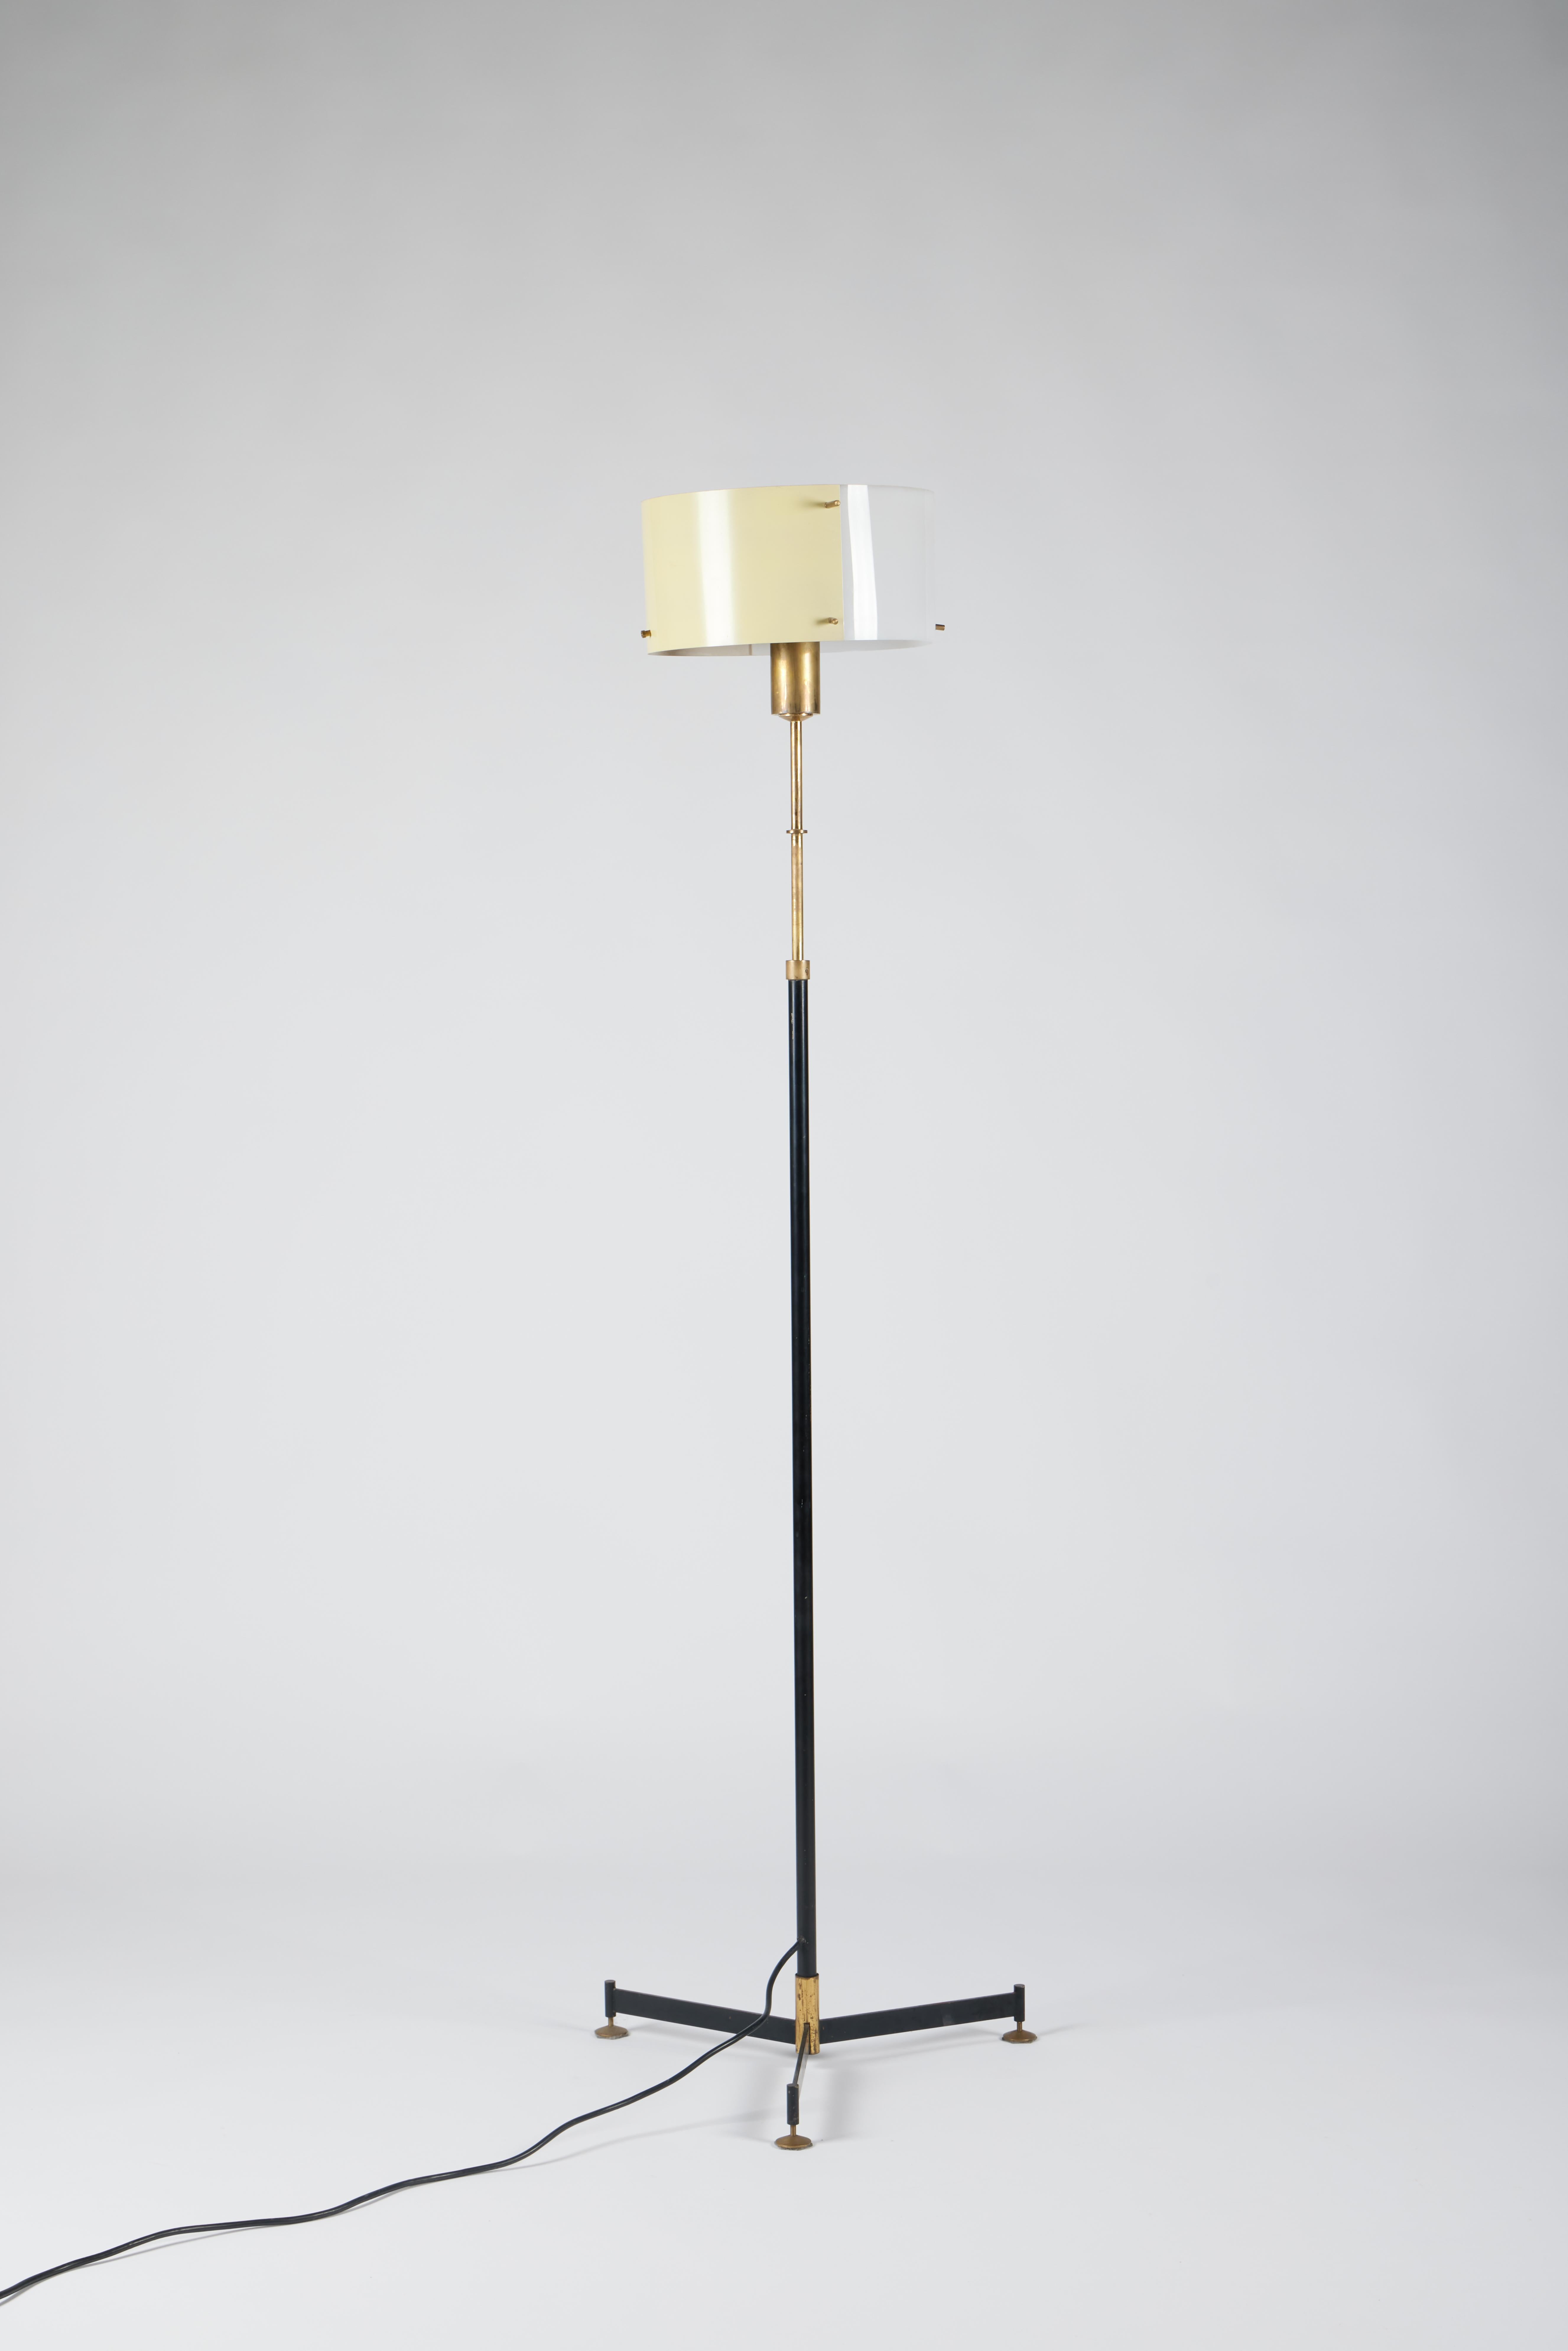 Italian Mid-Century, Modern floor lamp with adjustable height by Stilnovo, 1950s

This lamp, adjustable in height, could be a great piece, with its warm light, to place in your living room or study to furnish and illuminate the room at the same